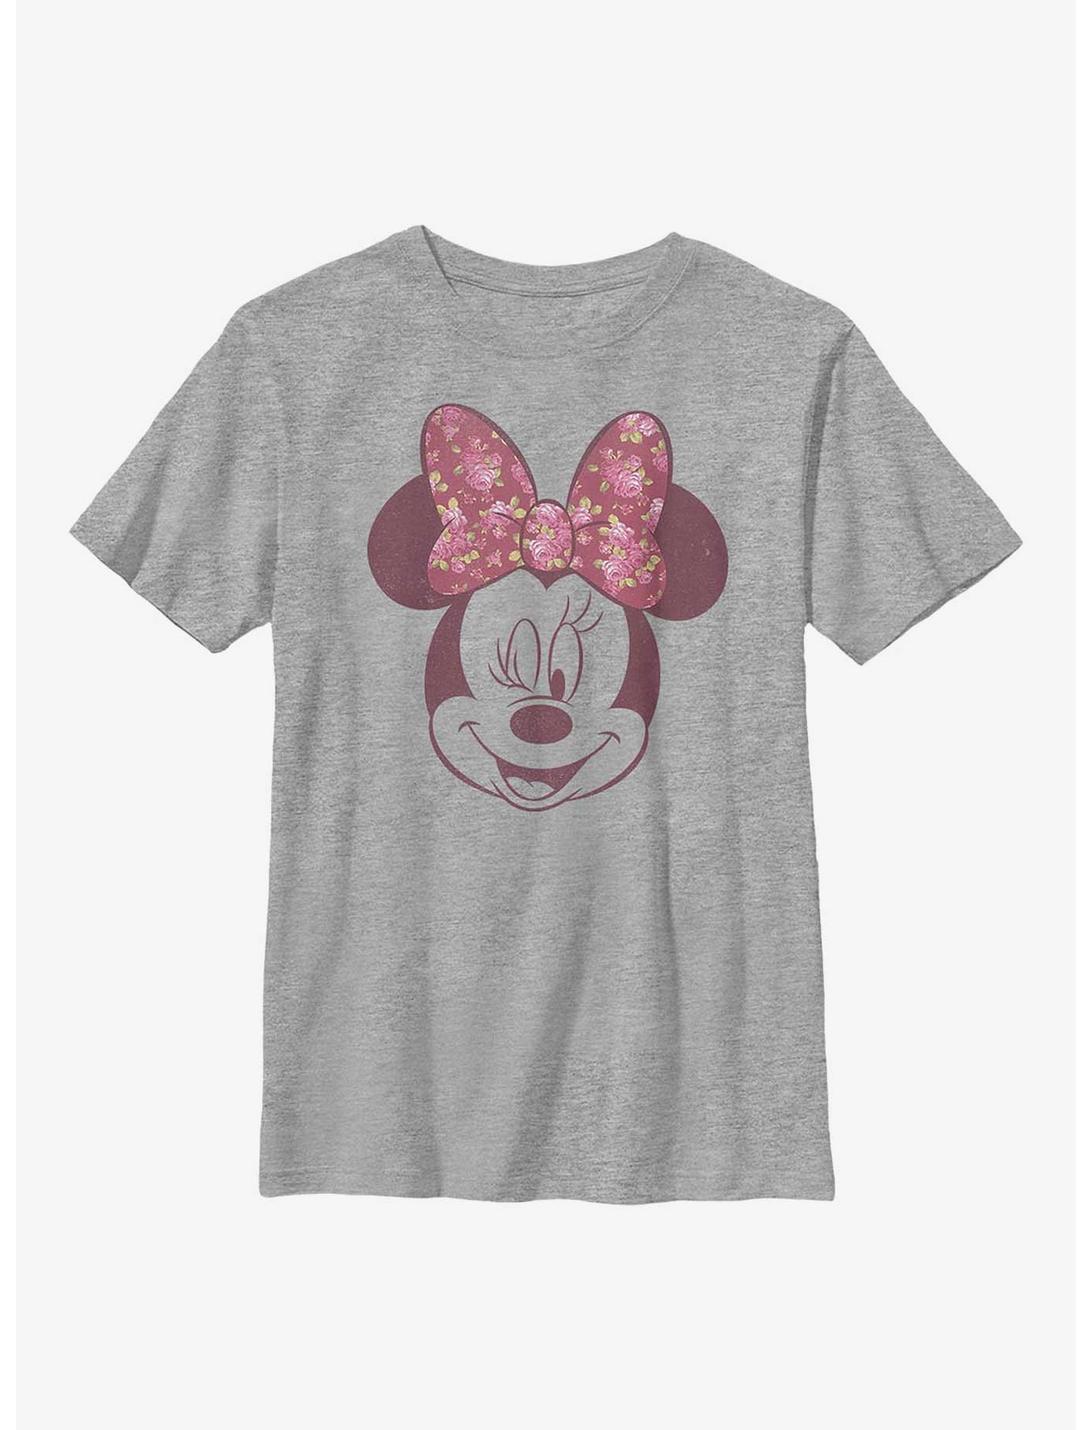 Disney Minnie Mouse Love Rose Youth T-Shirt, ATH HTR, hi-res